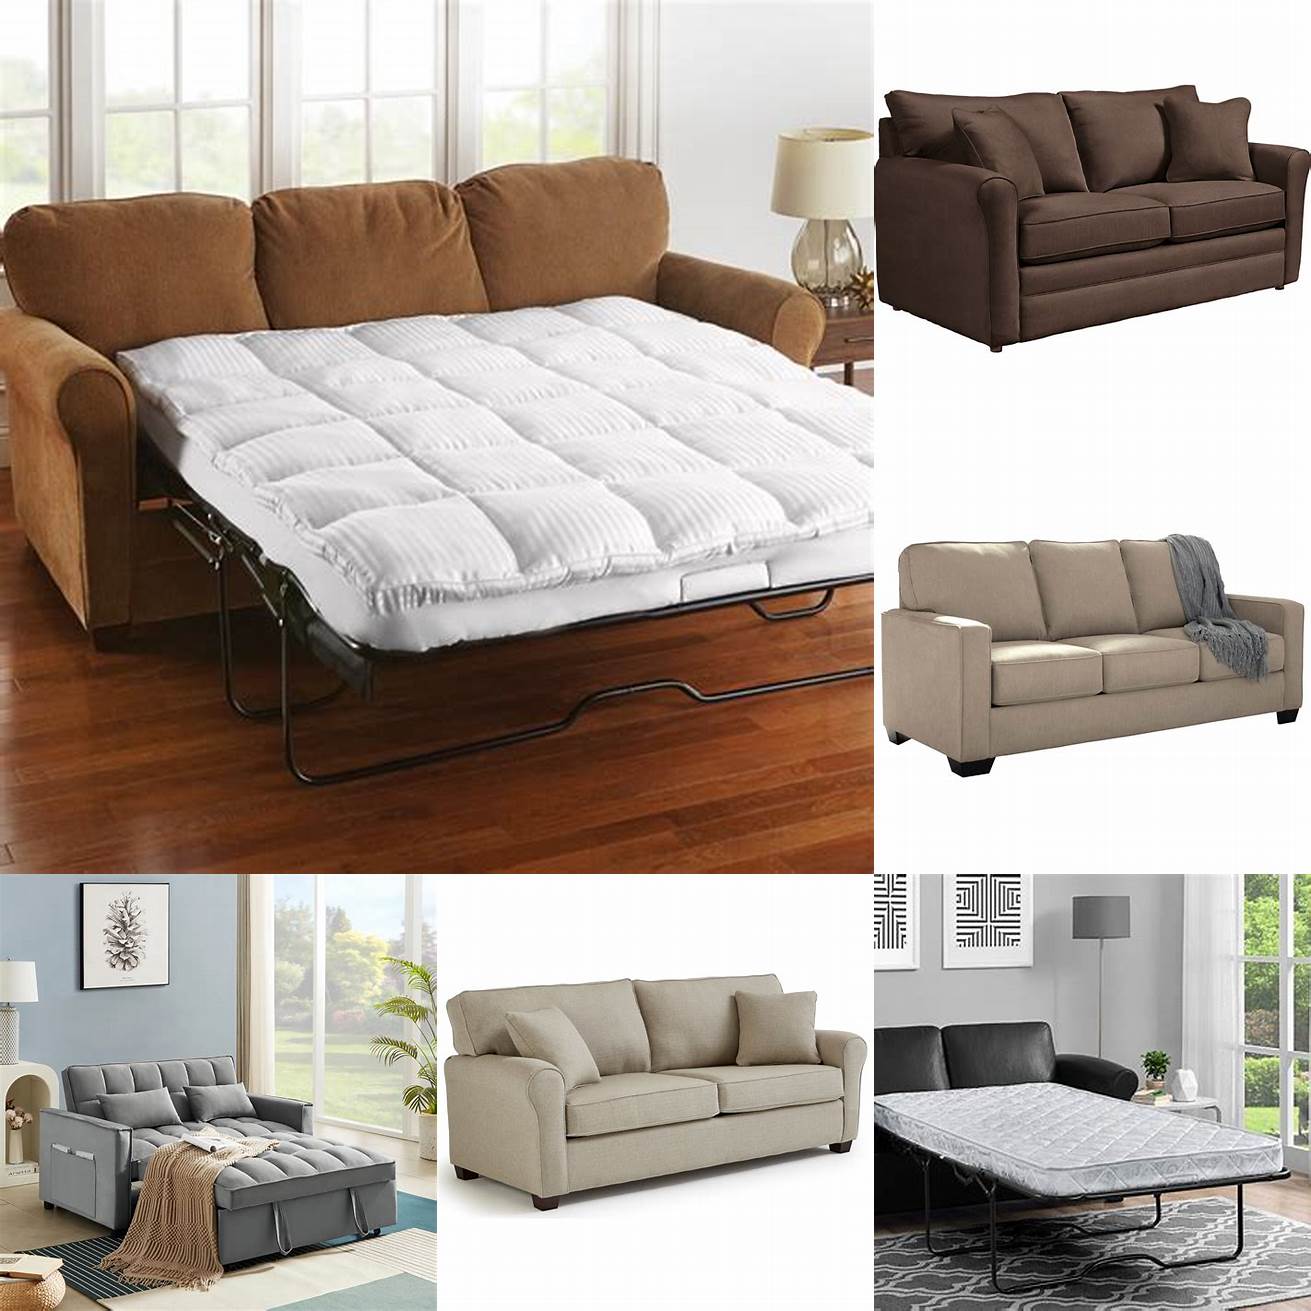 Comfort Full Sleeper Sofas come with different types of mattresses and cushions